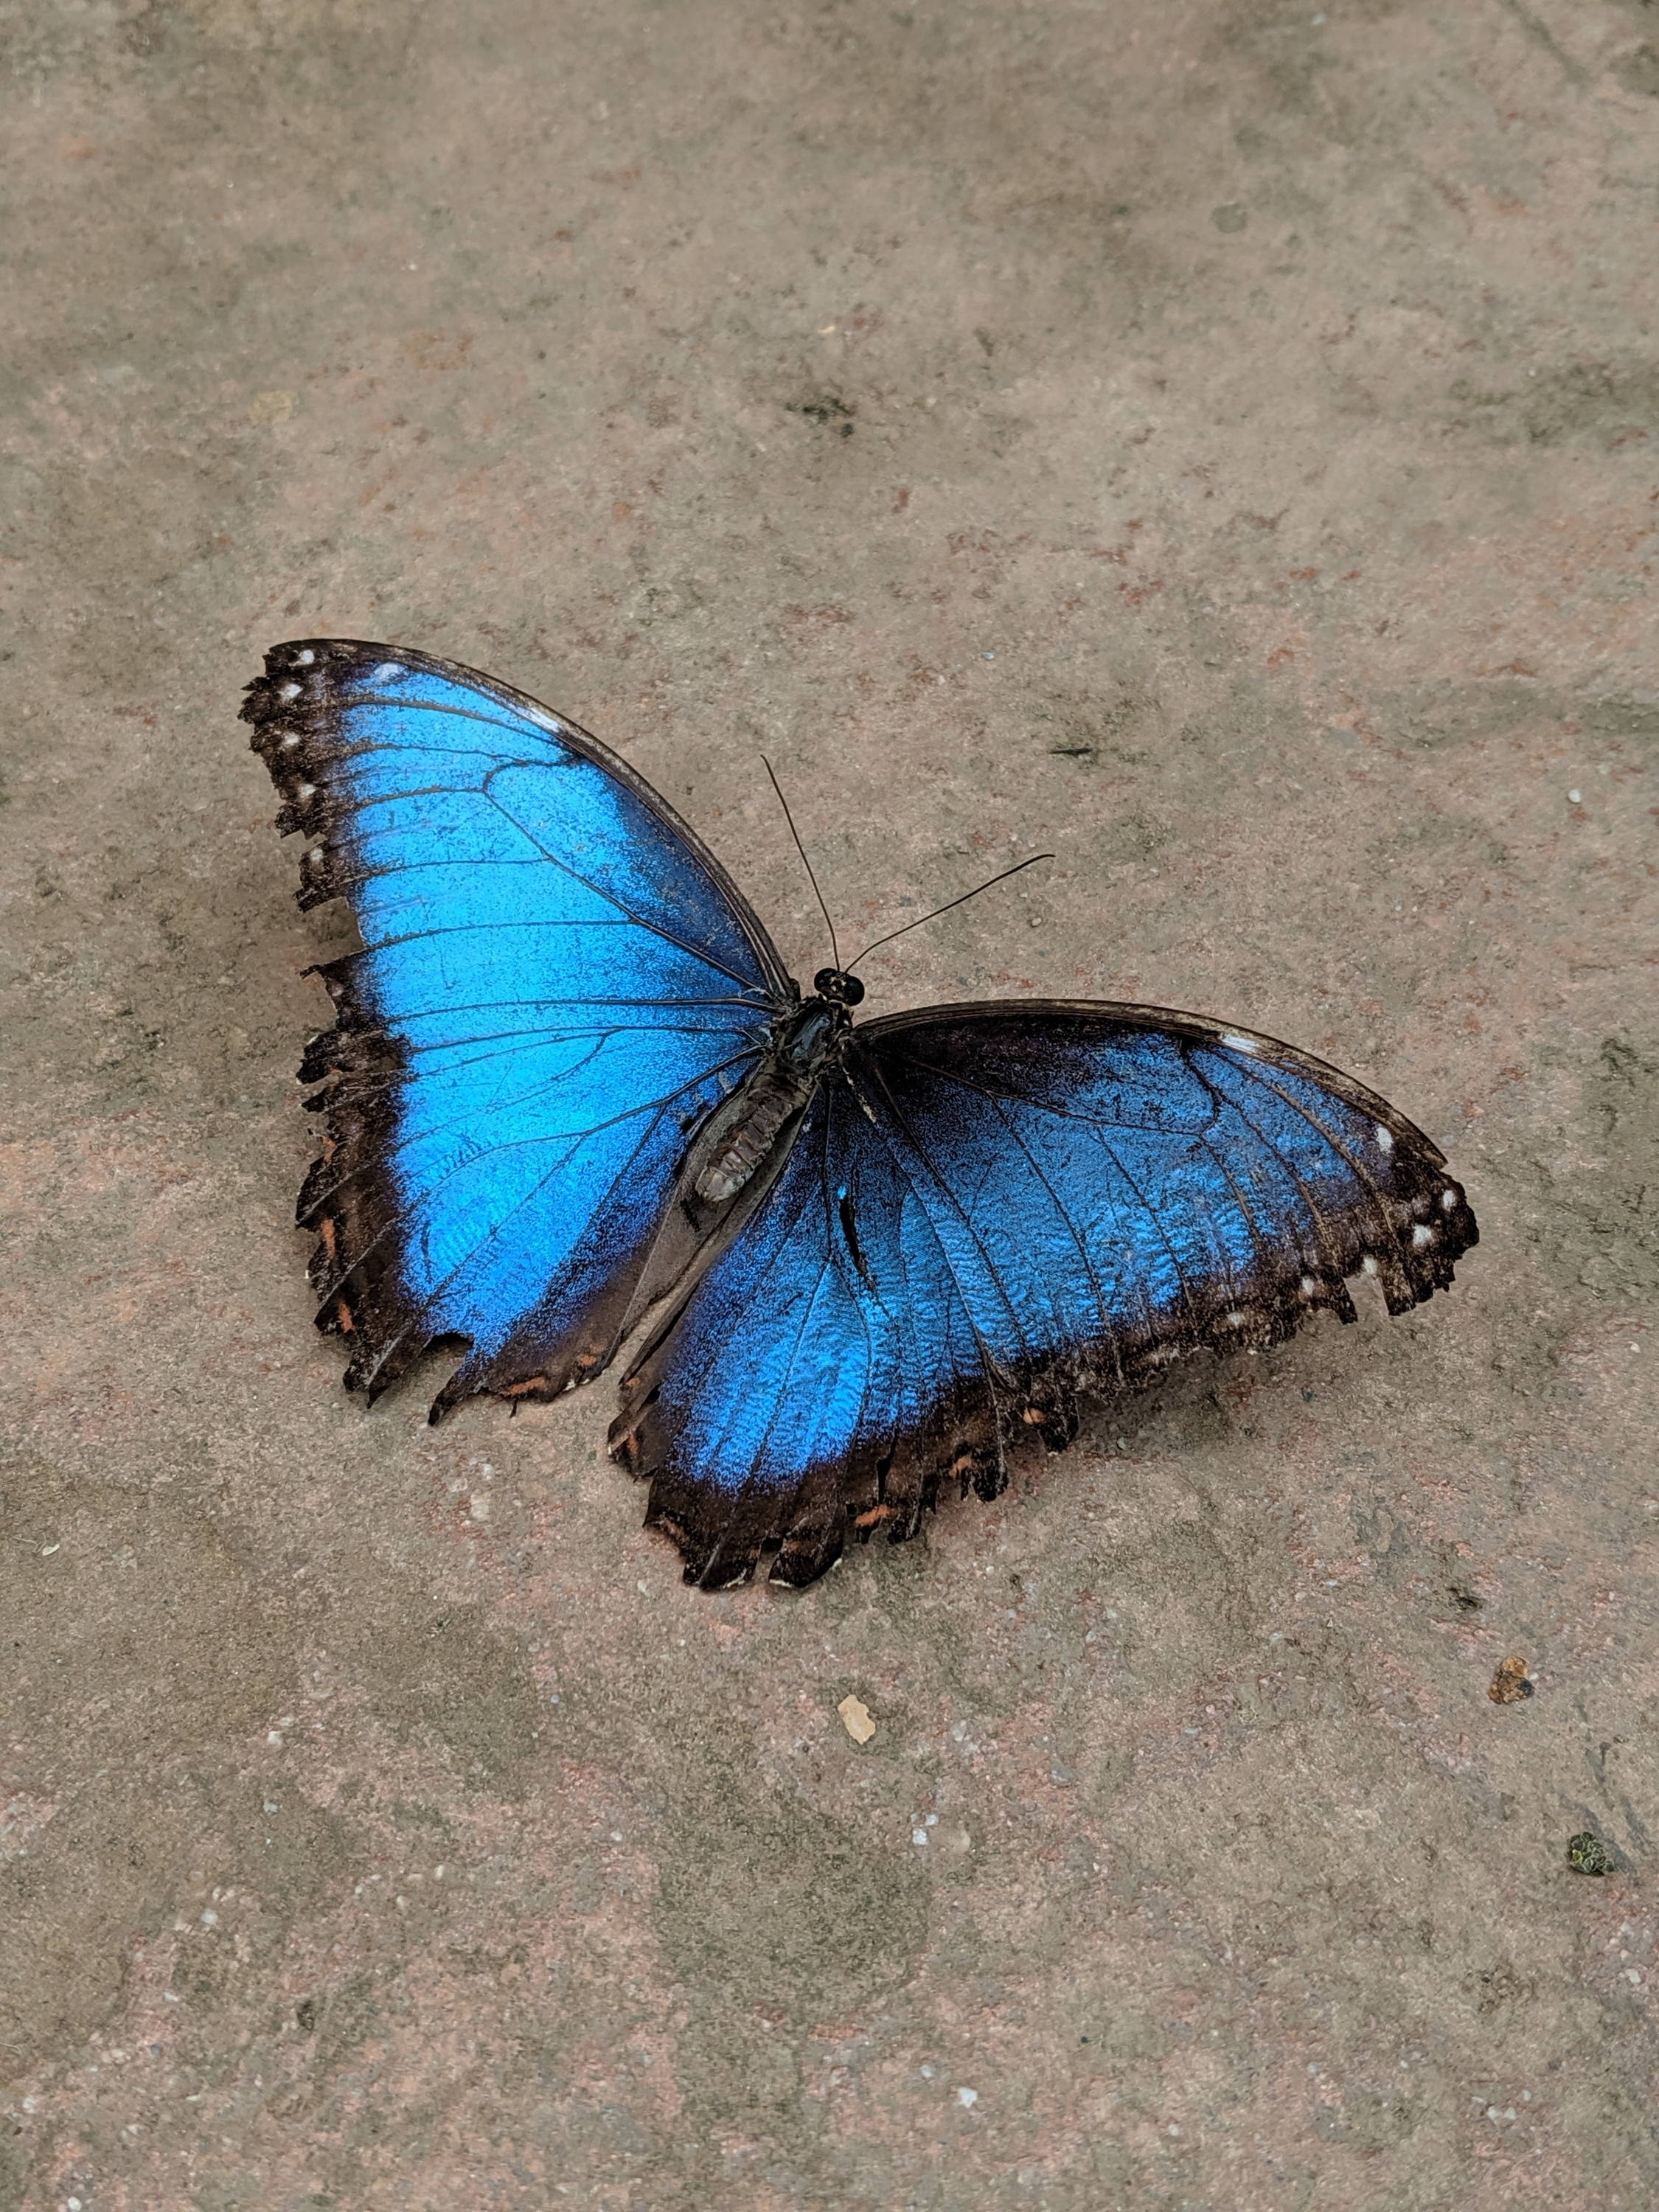 Cypris Materials uses the blue morpho butterfly for inspiration in the development of their colour coating technology. They say their technology is able to achieve all the colours of the rainbow without any toxic dyes or pigments.